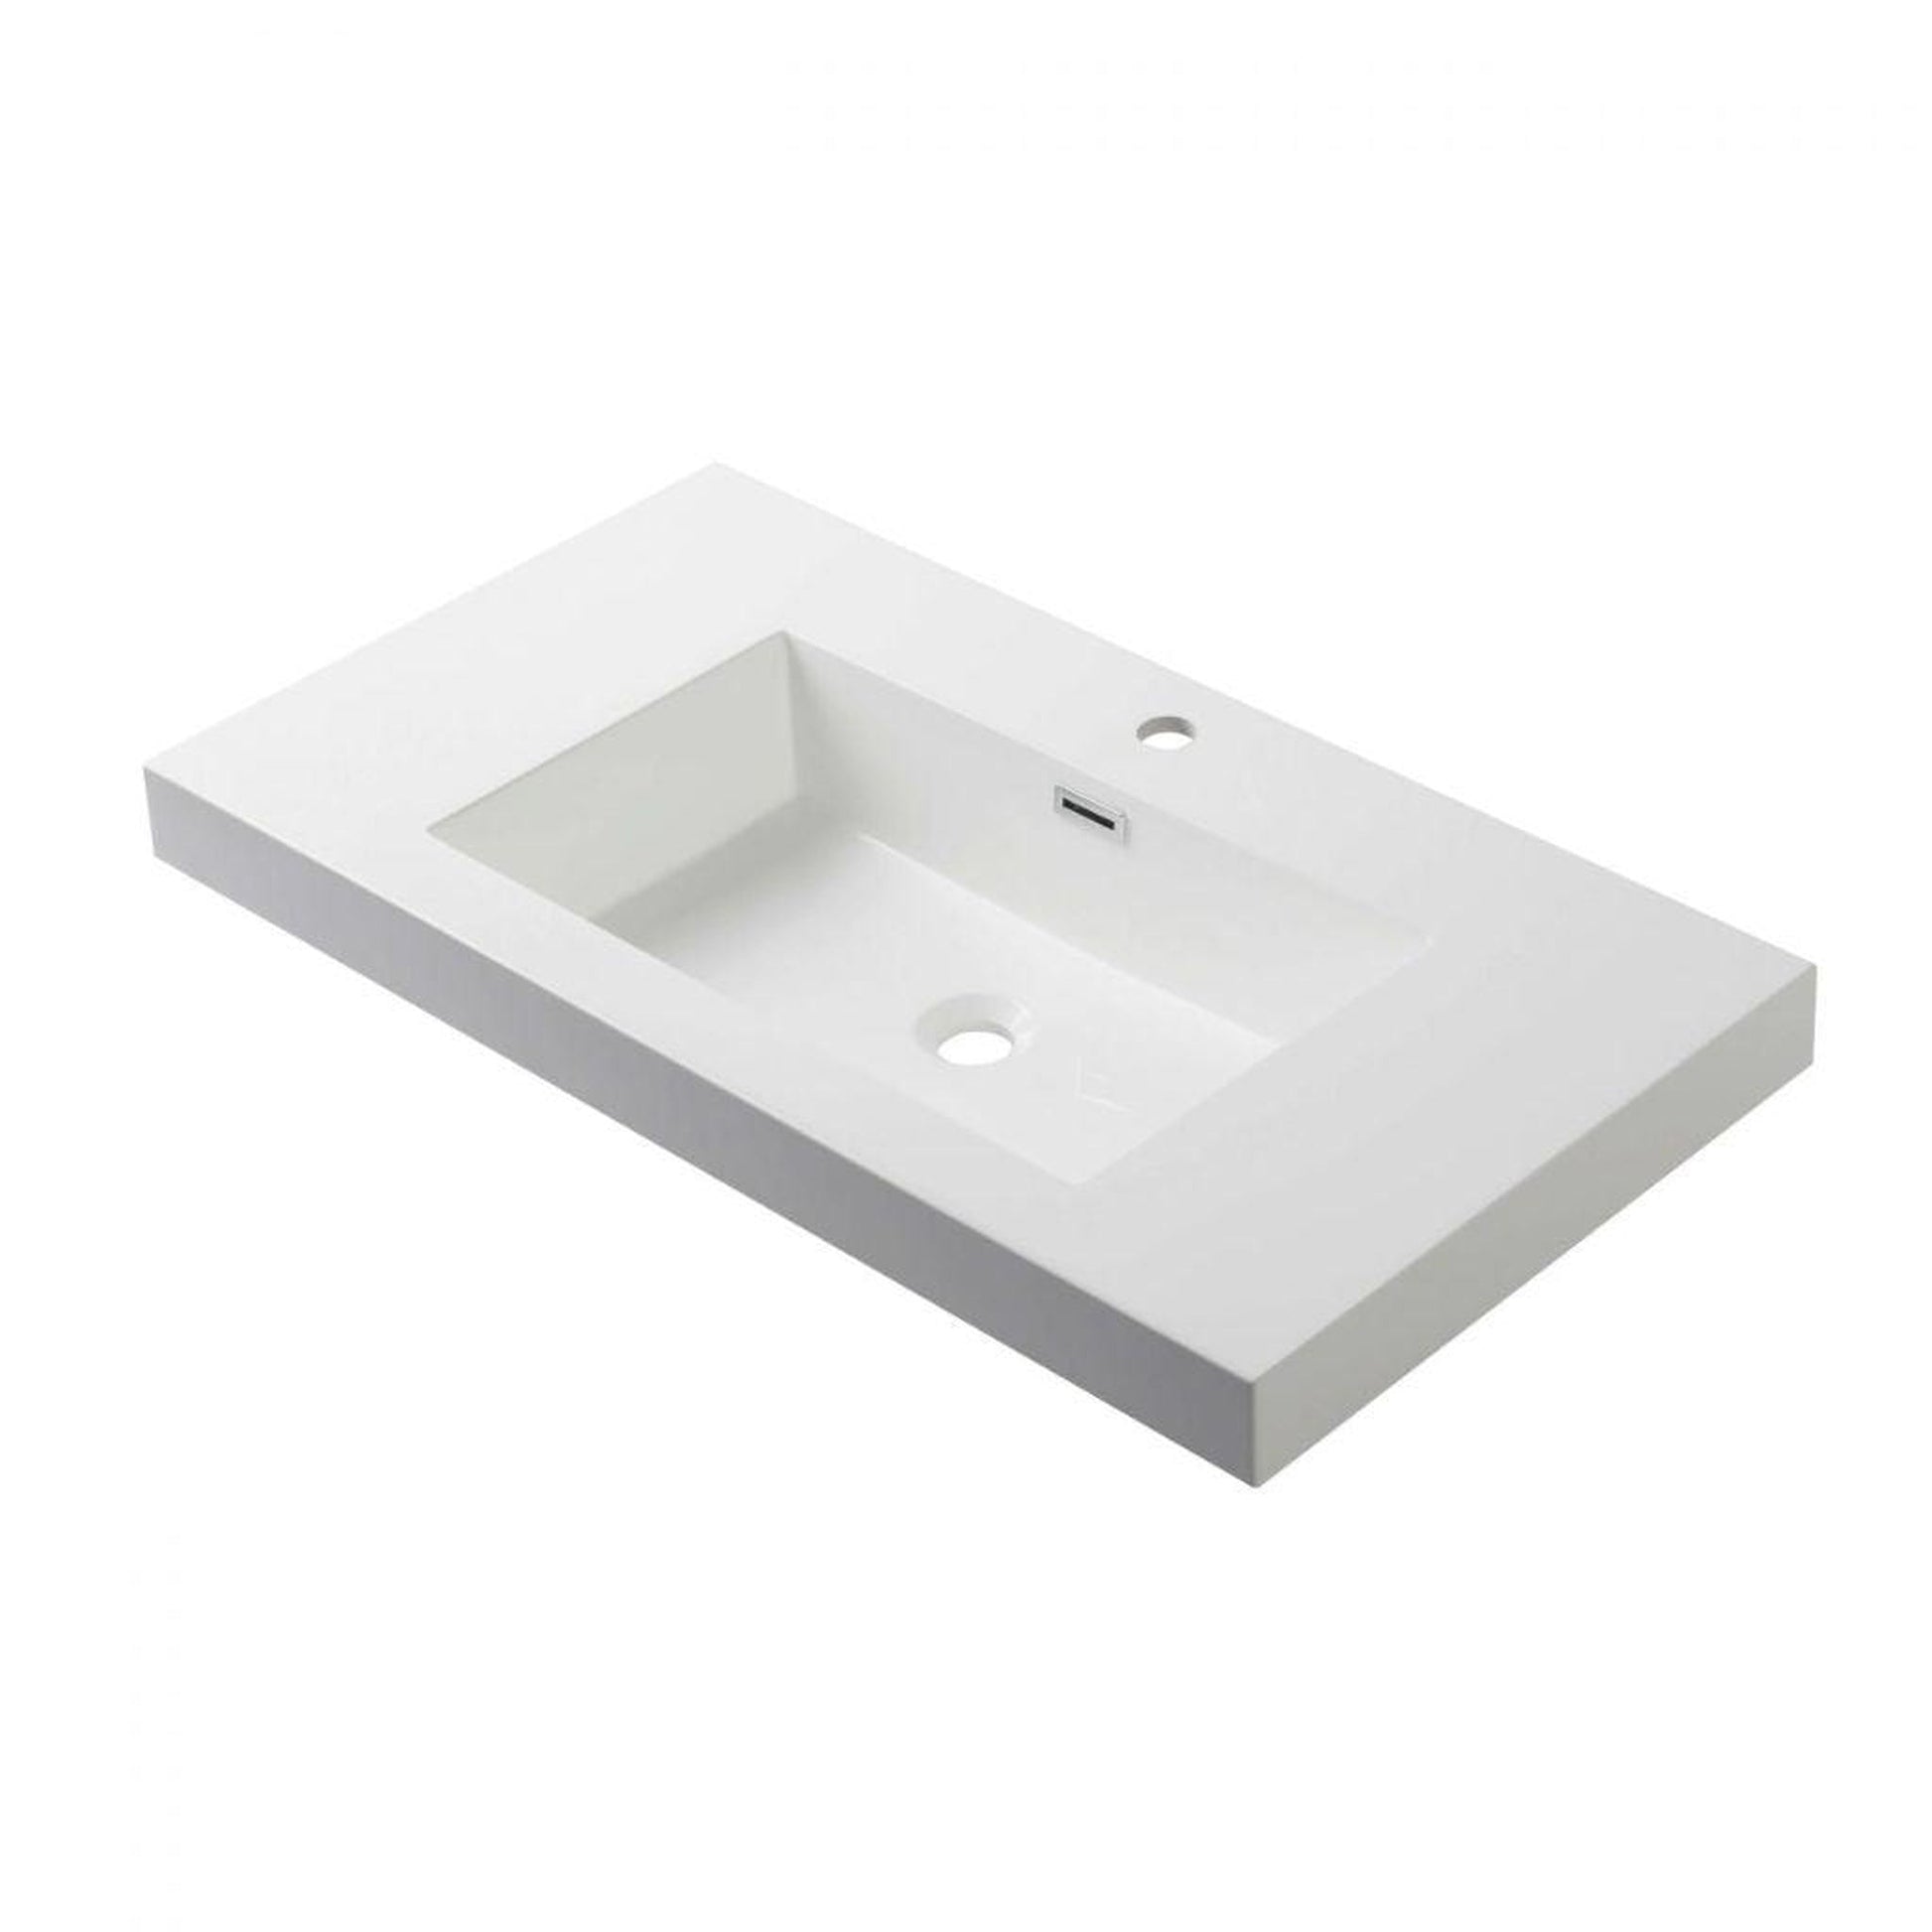 Blossom 30" x 18" White Rectangular Acrylic Vanity Top With Integrated Single Sink And Overflow